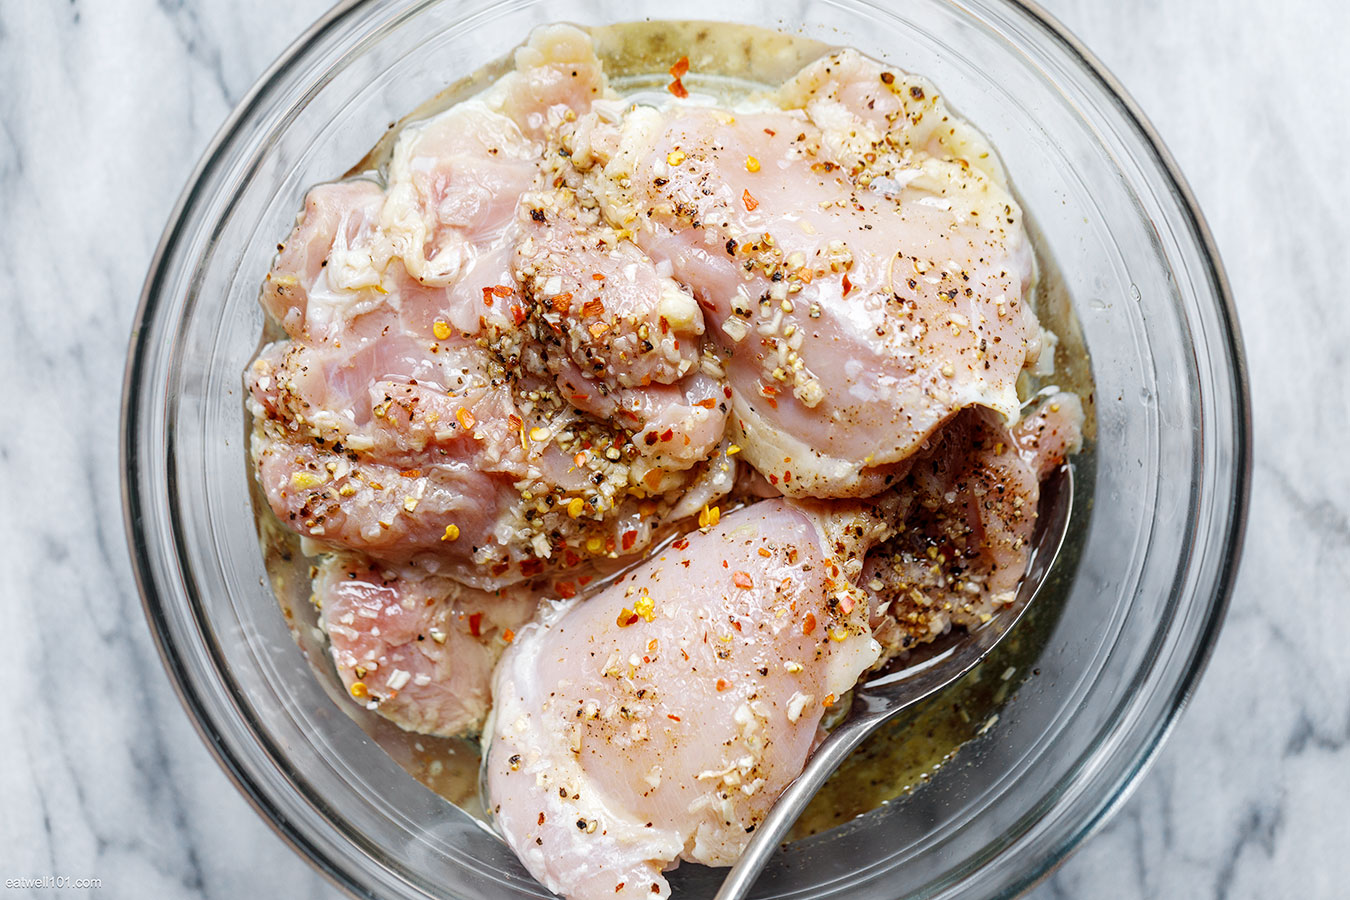 how to cook chicken thighs